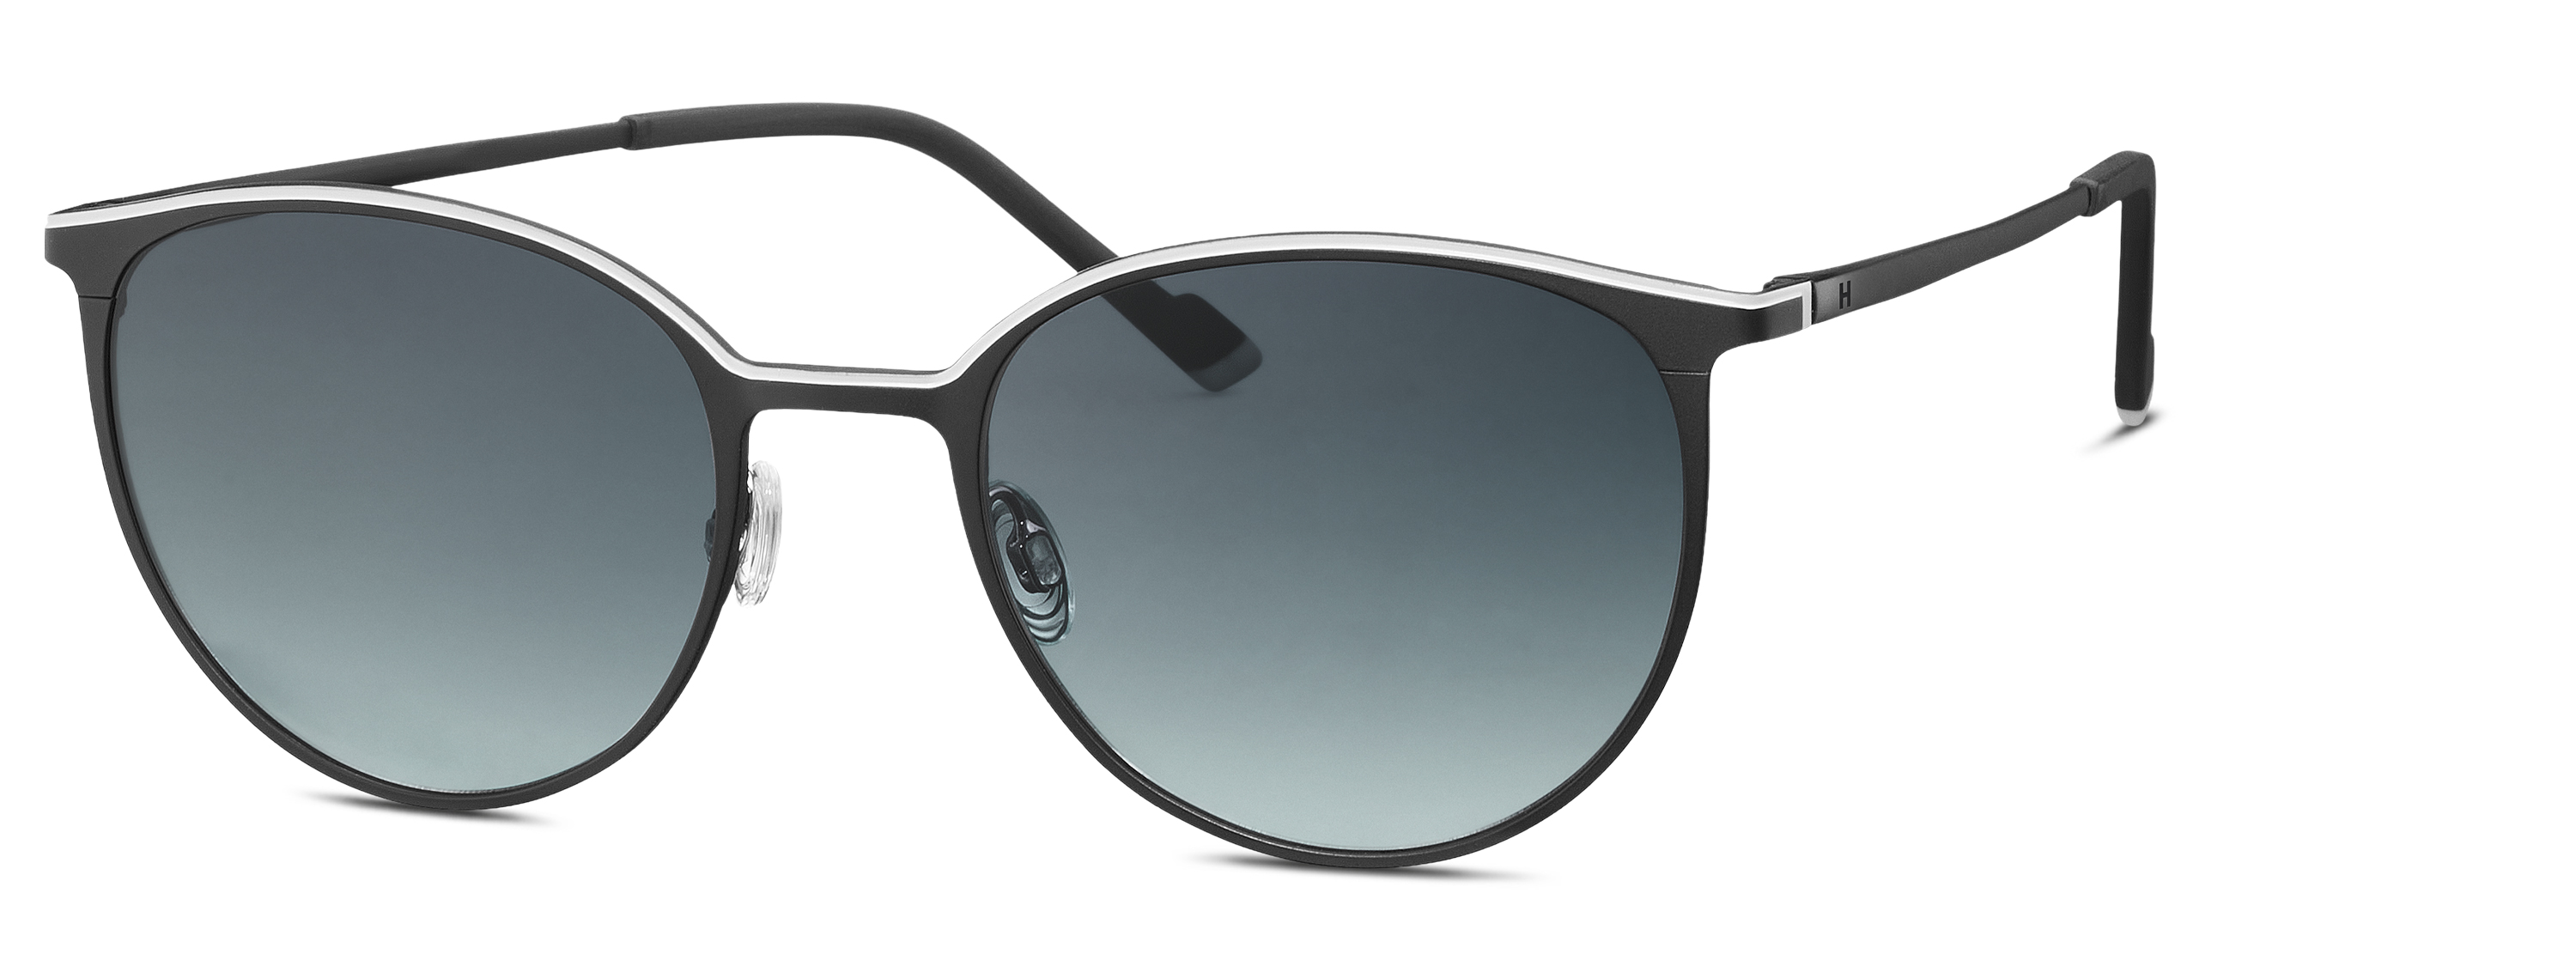 [products.image.front] HUMPHREY´S eyewear 585336 10 Sonnenbrille